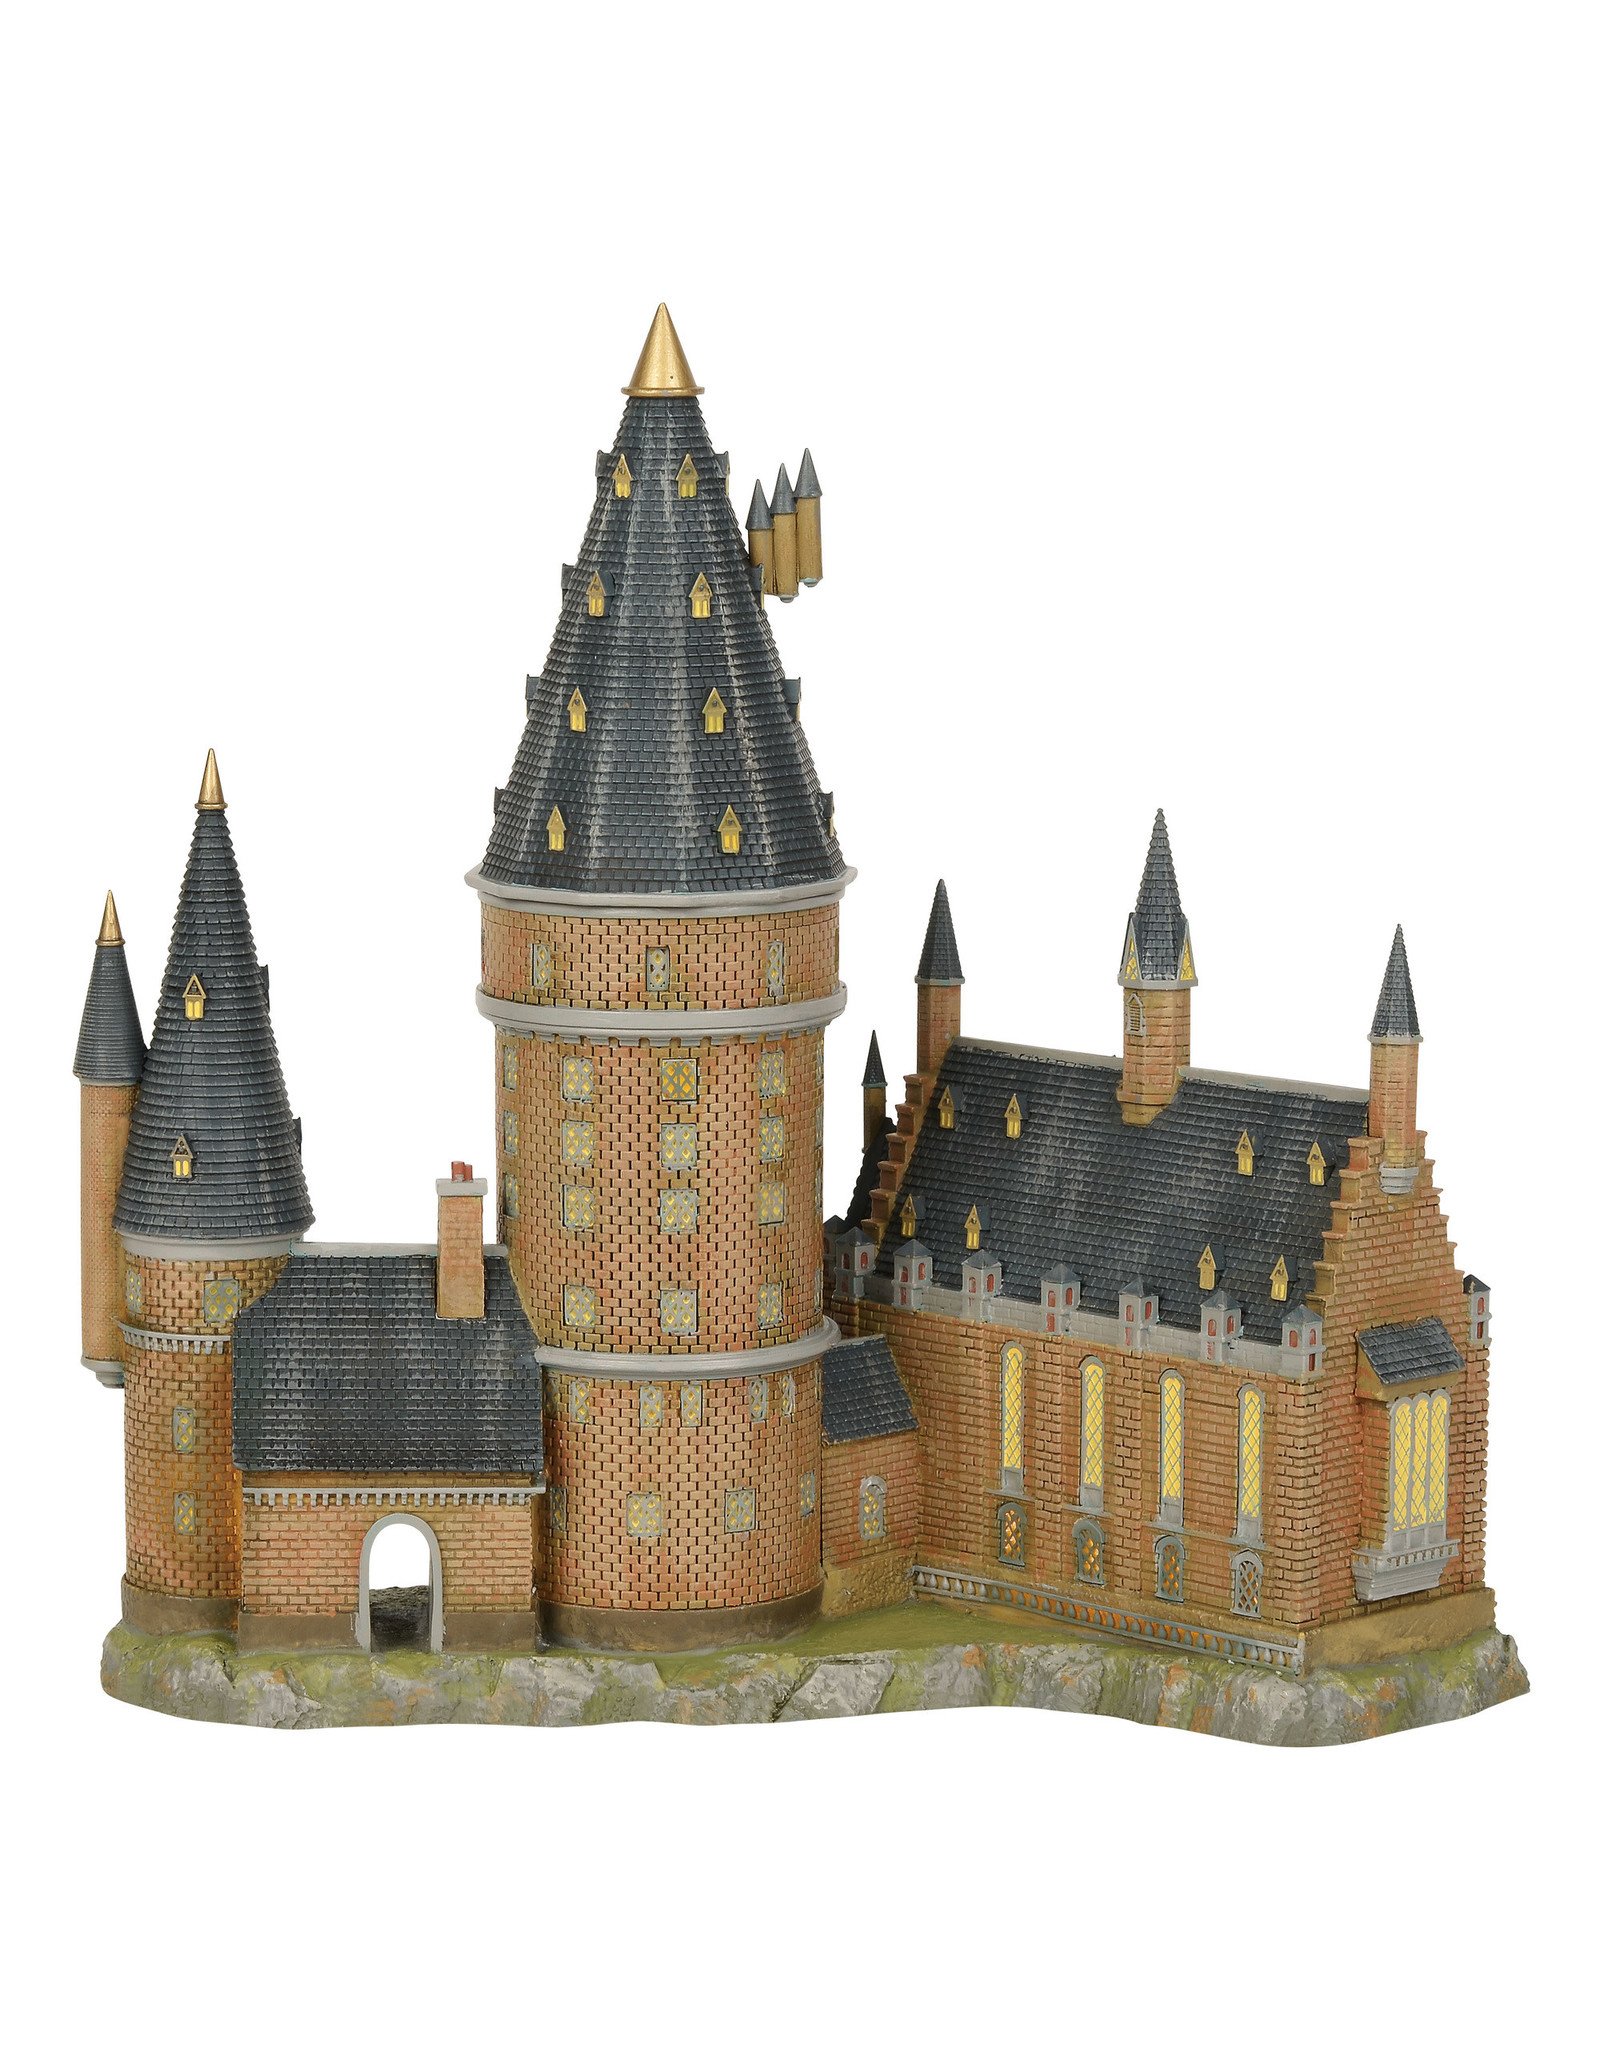 Department 56 Hogwards Great Hall & Tower